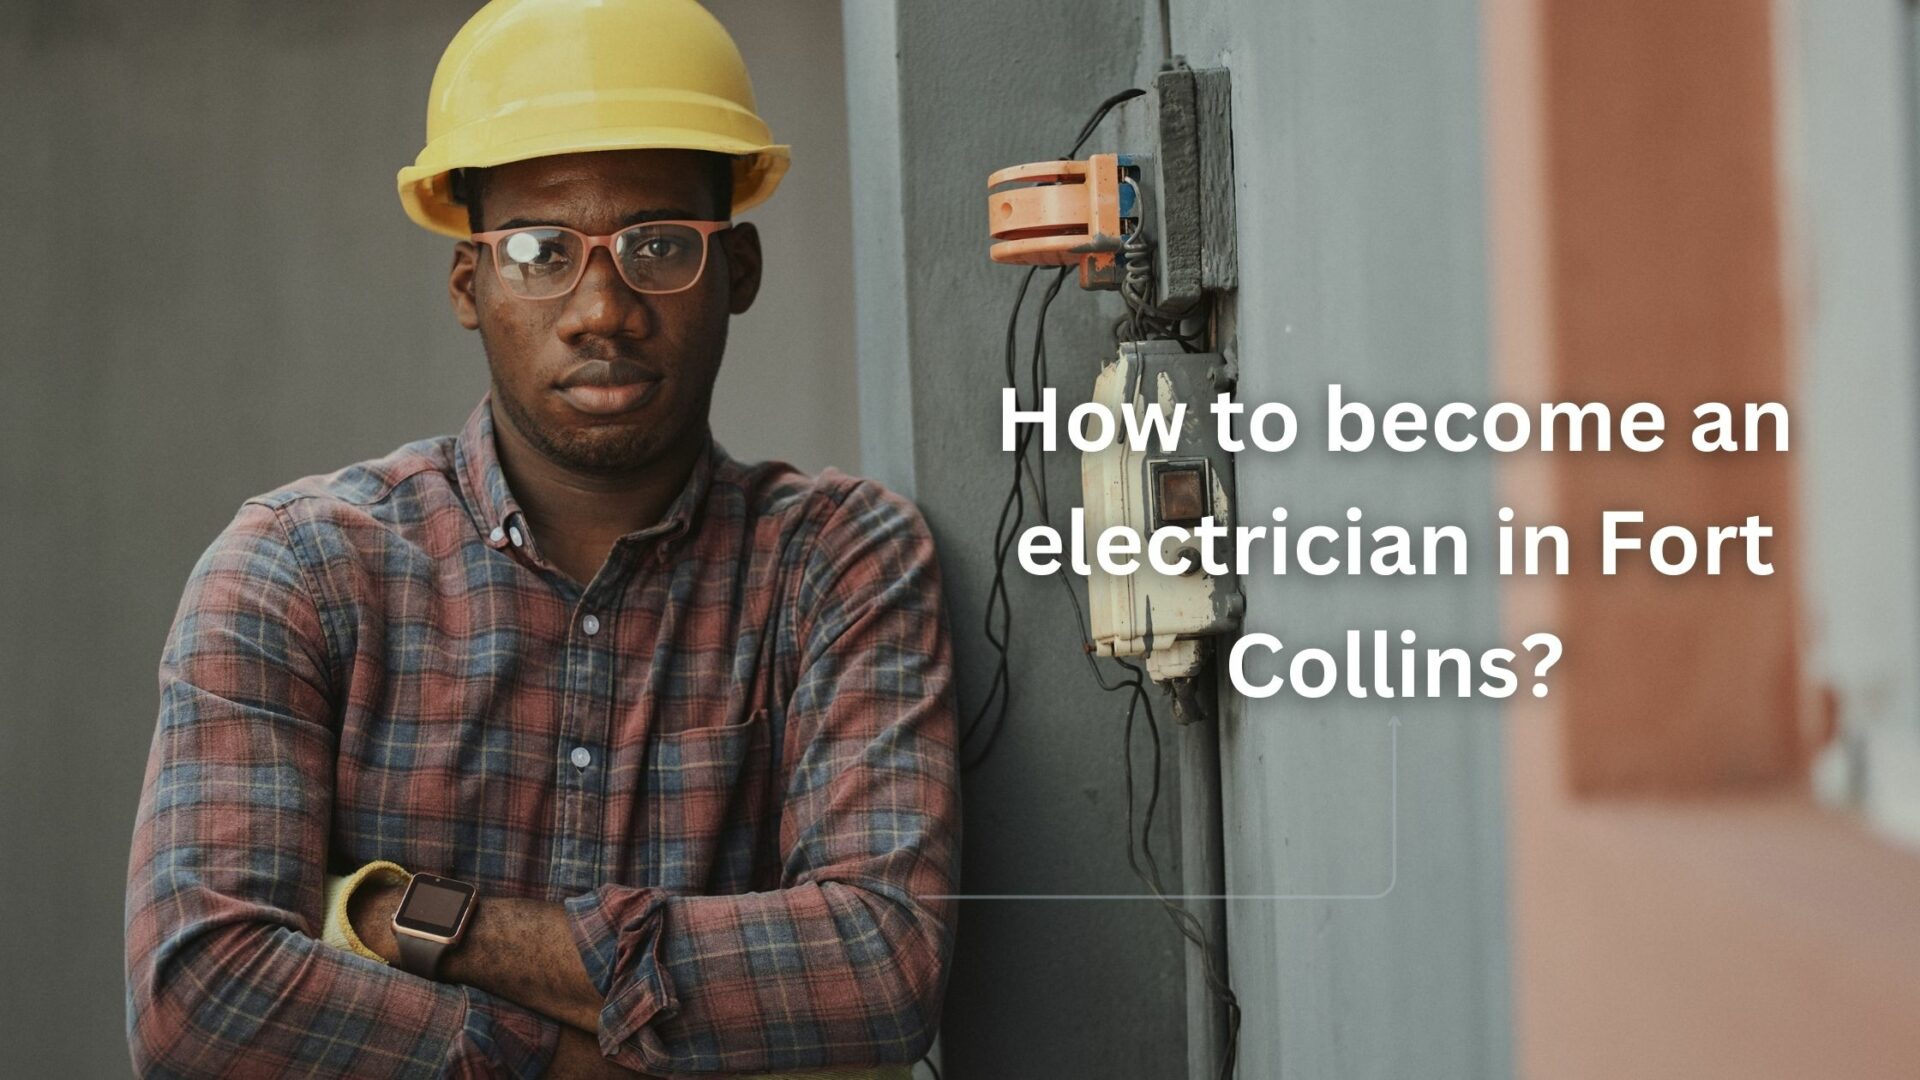 How to become an electrician in Fort Collins